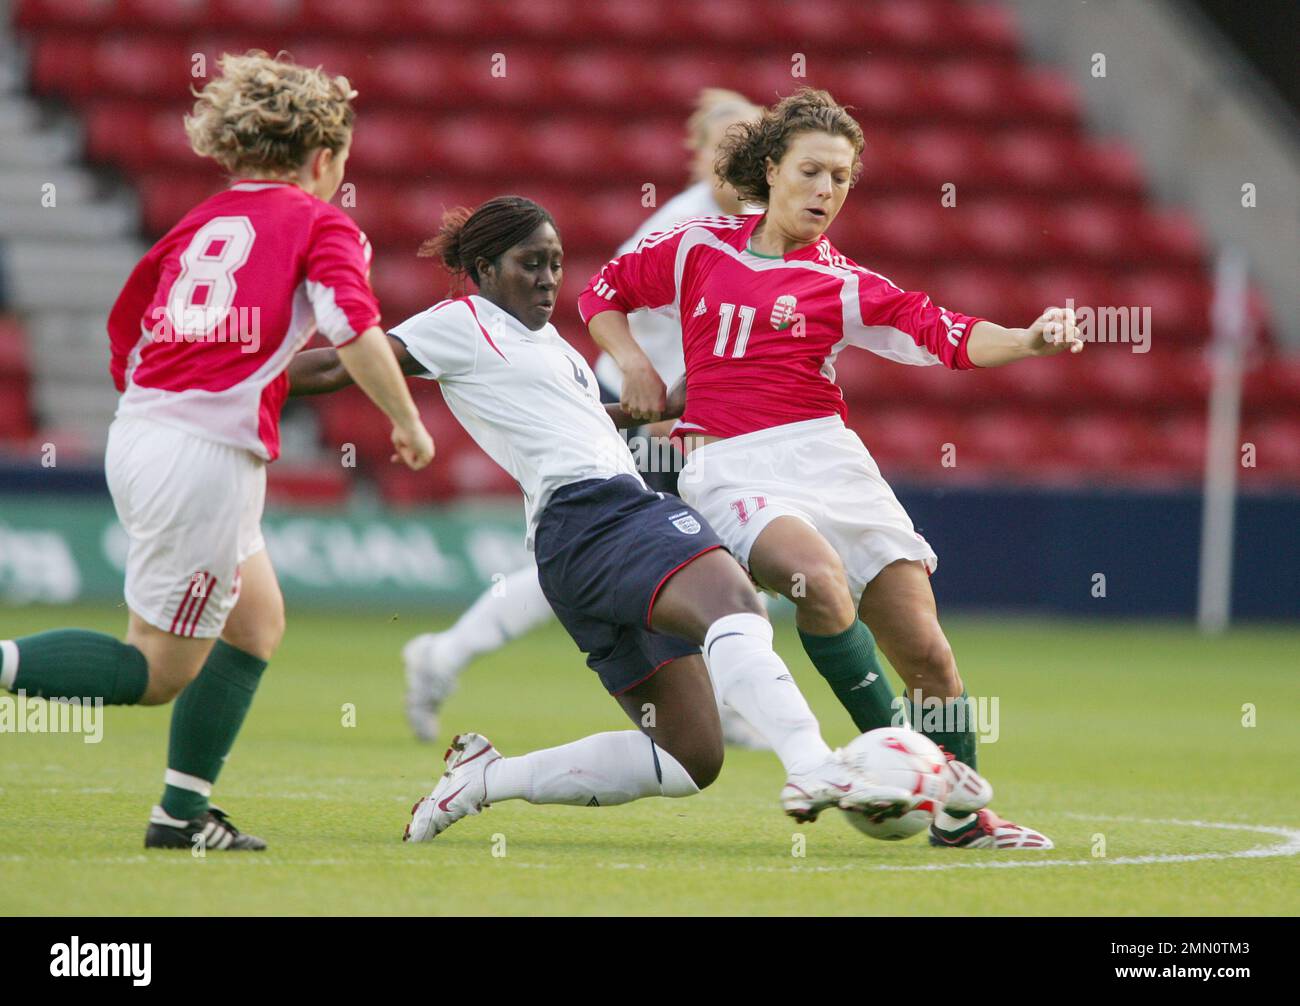 England v Hungary Women's football 2006 World Cup Qualifier  at St Marys stadium Southampton. Englands Anita Asante(no 4 )  in action.  image is bound by Dataco restrictions on how it can be used. EDITORIAL USE ONLY No use with unauthorised audio, video, data, fixture lists, club/league logos or “live” services. Online in-match use limited to 120 images, no video emulation. No use in betting, games or single club/league/player publications Stock Photo